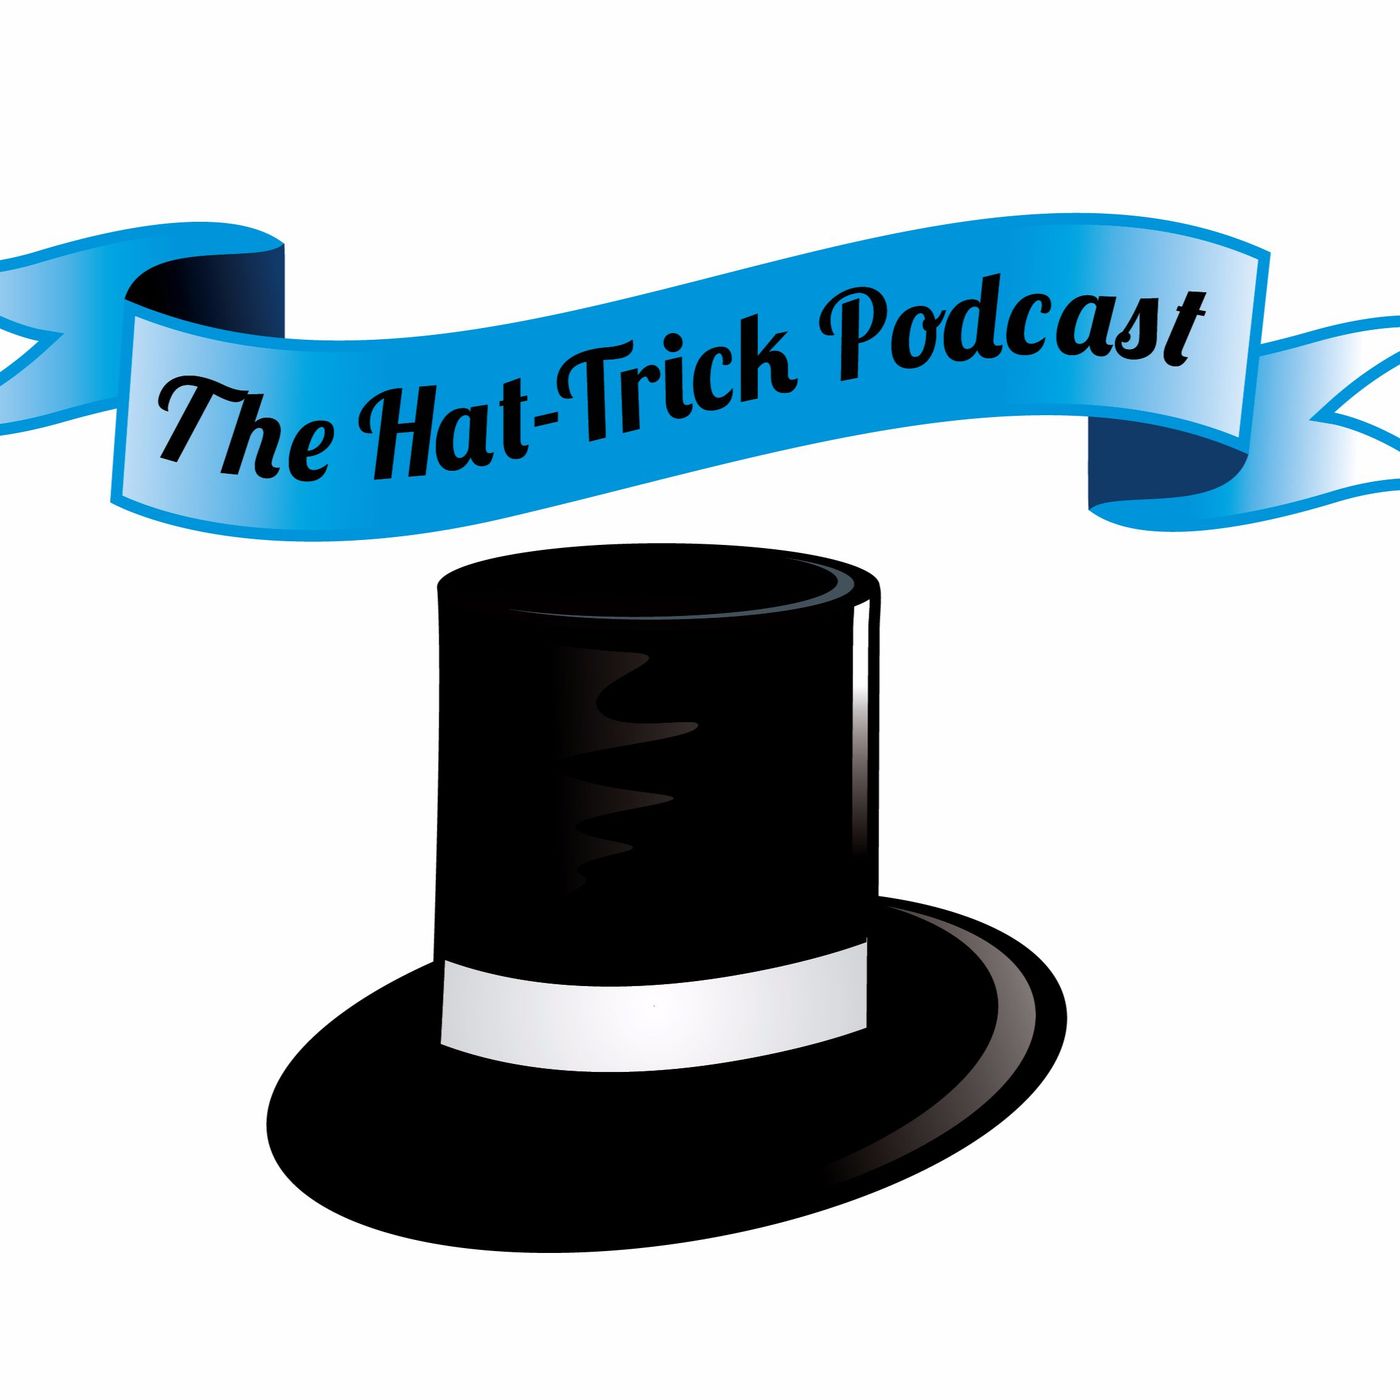 The Hat-Trick Podcast